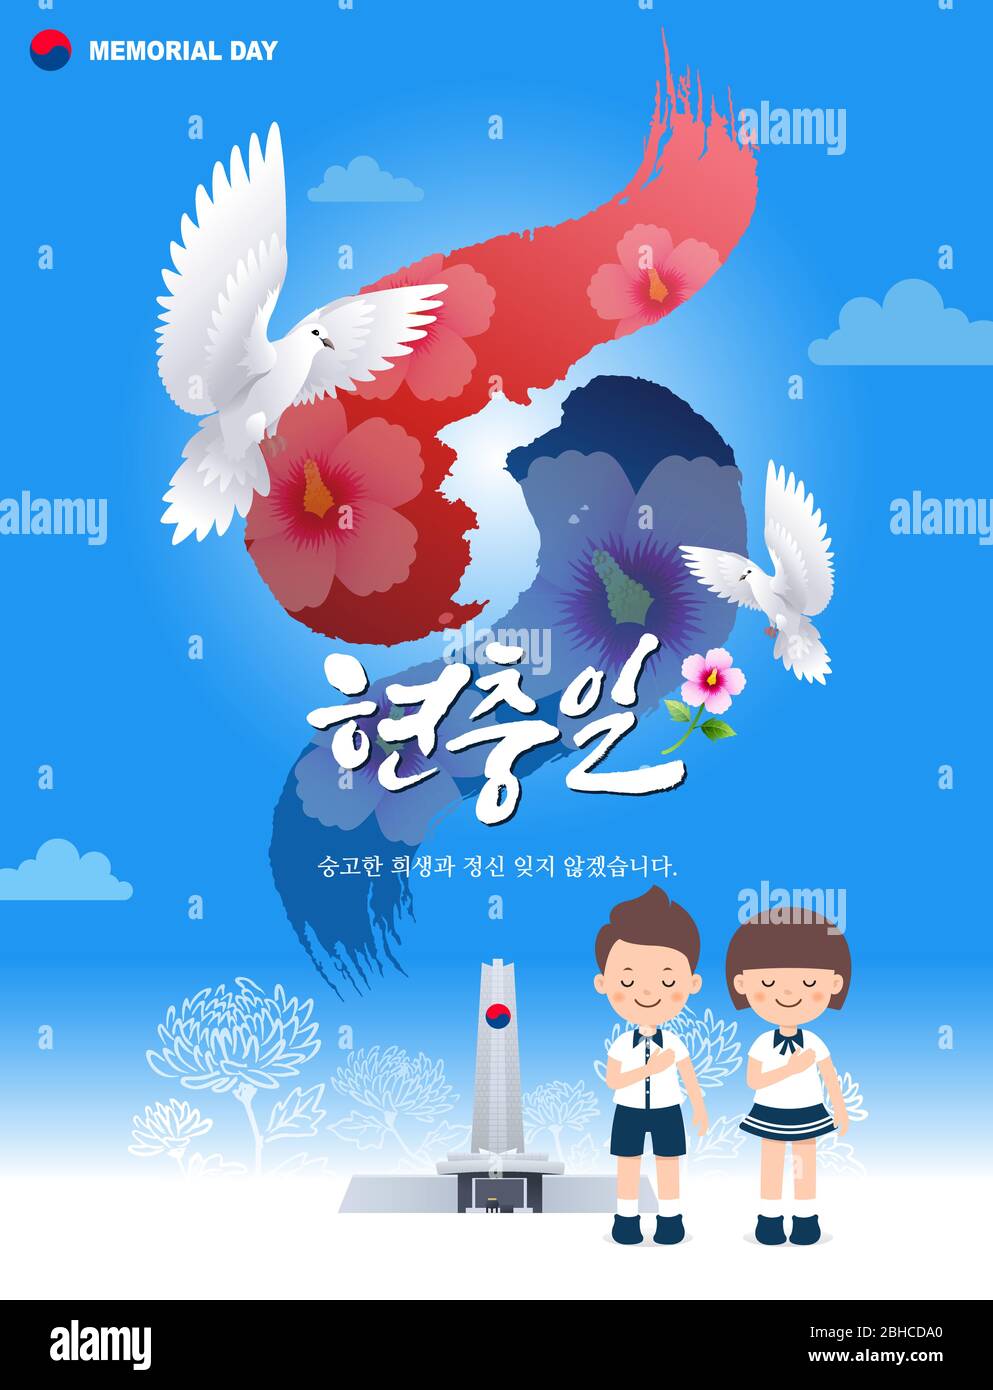 Memorial Day, Korean Translation. The children are paying homage in front of the monument. Pigeon Taegeukgi, Korean map background design. Stock Vector